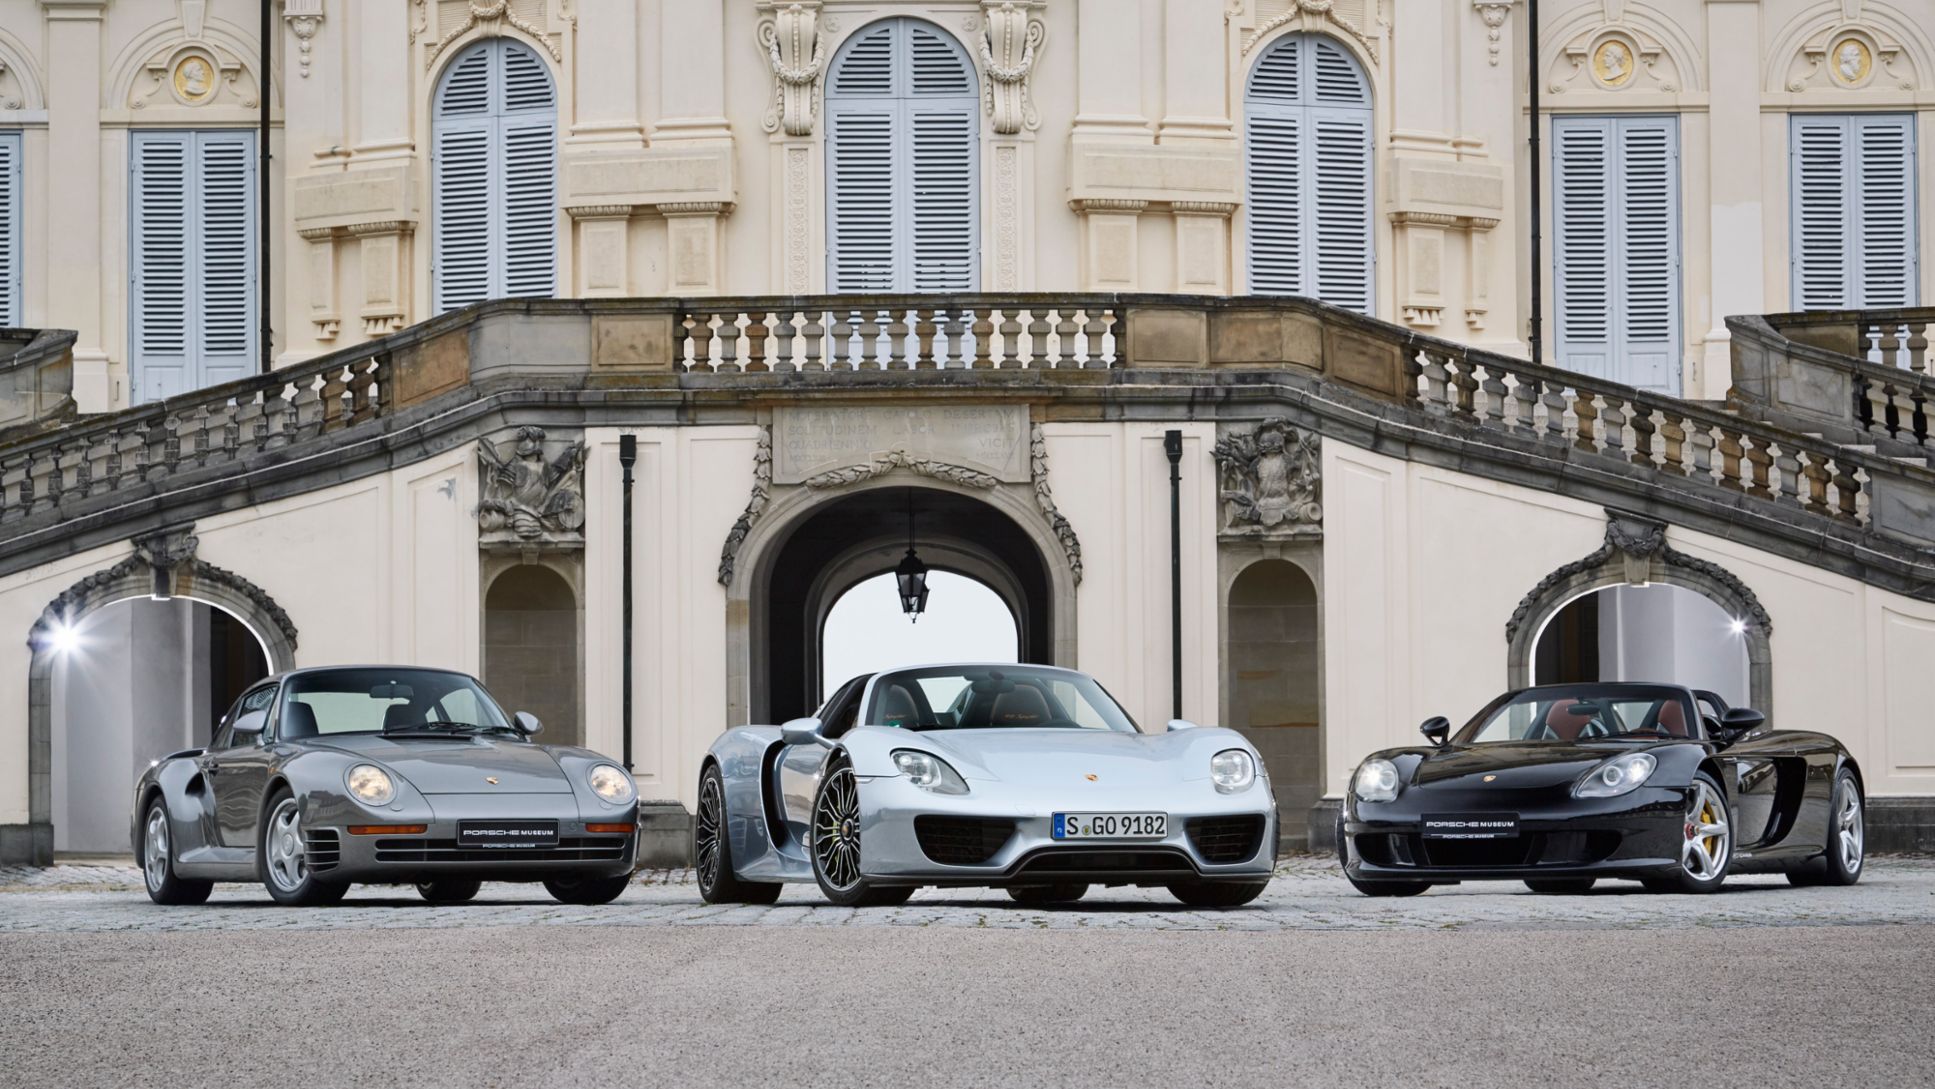 Three Porsche super sports cars among themselves: 959, 918 Spyder and Carrera GT (from left)